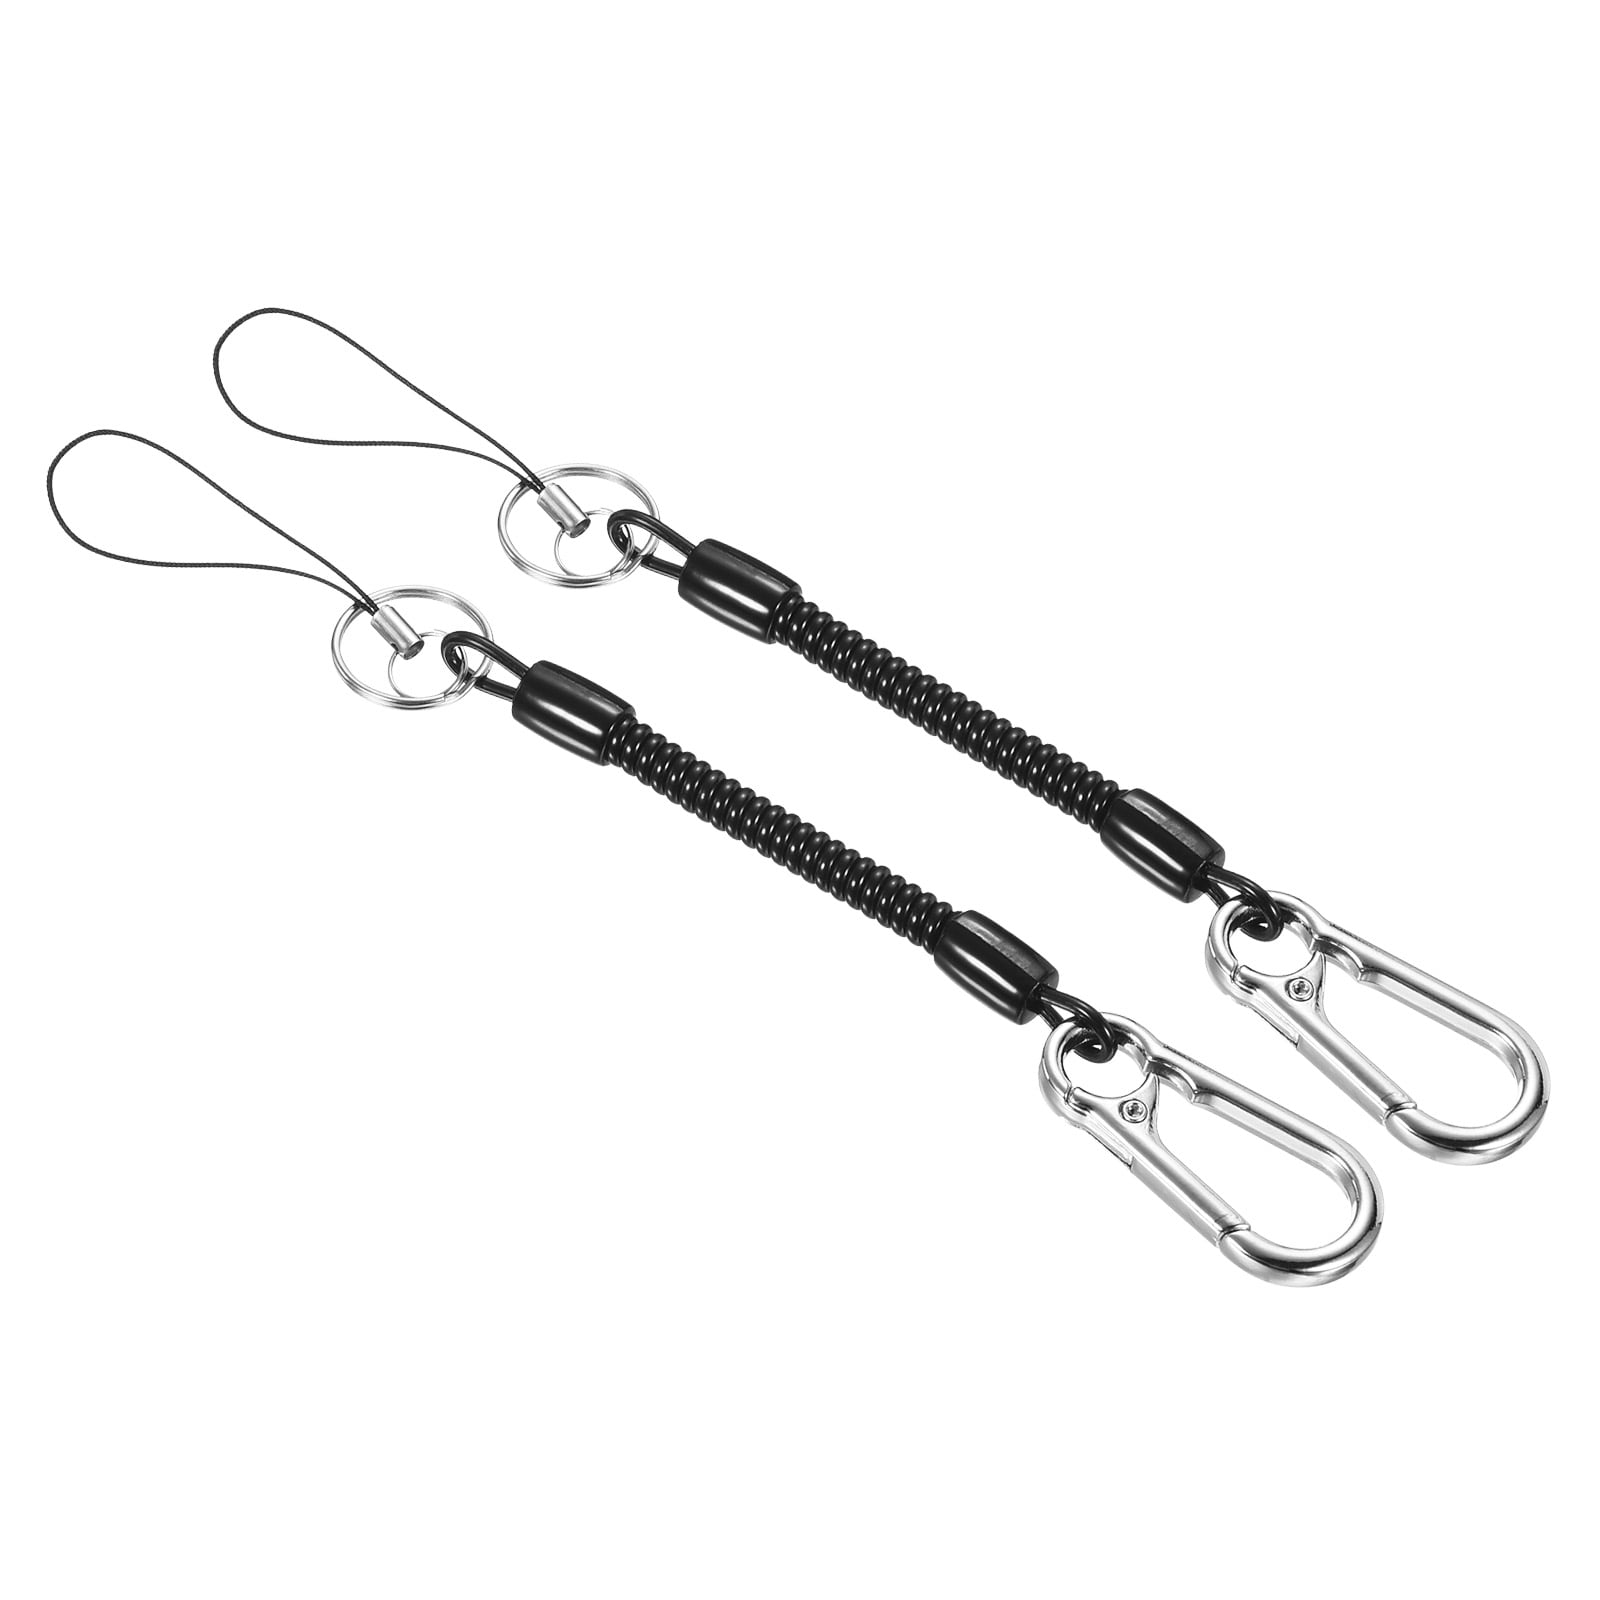 Uxcell Retractable Coil Spring Keychain Clasp with Big Key Ring 360mm, 2  Pack Plastic Spiral Stretchy Cord, Black